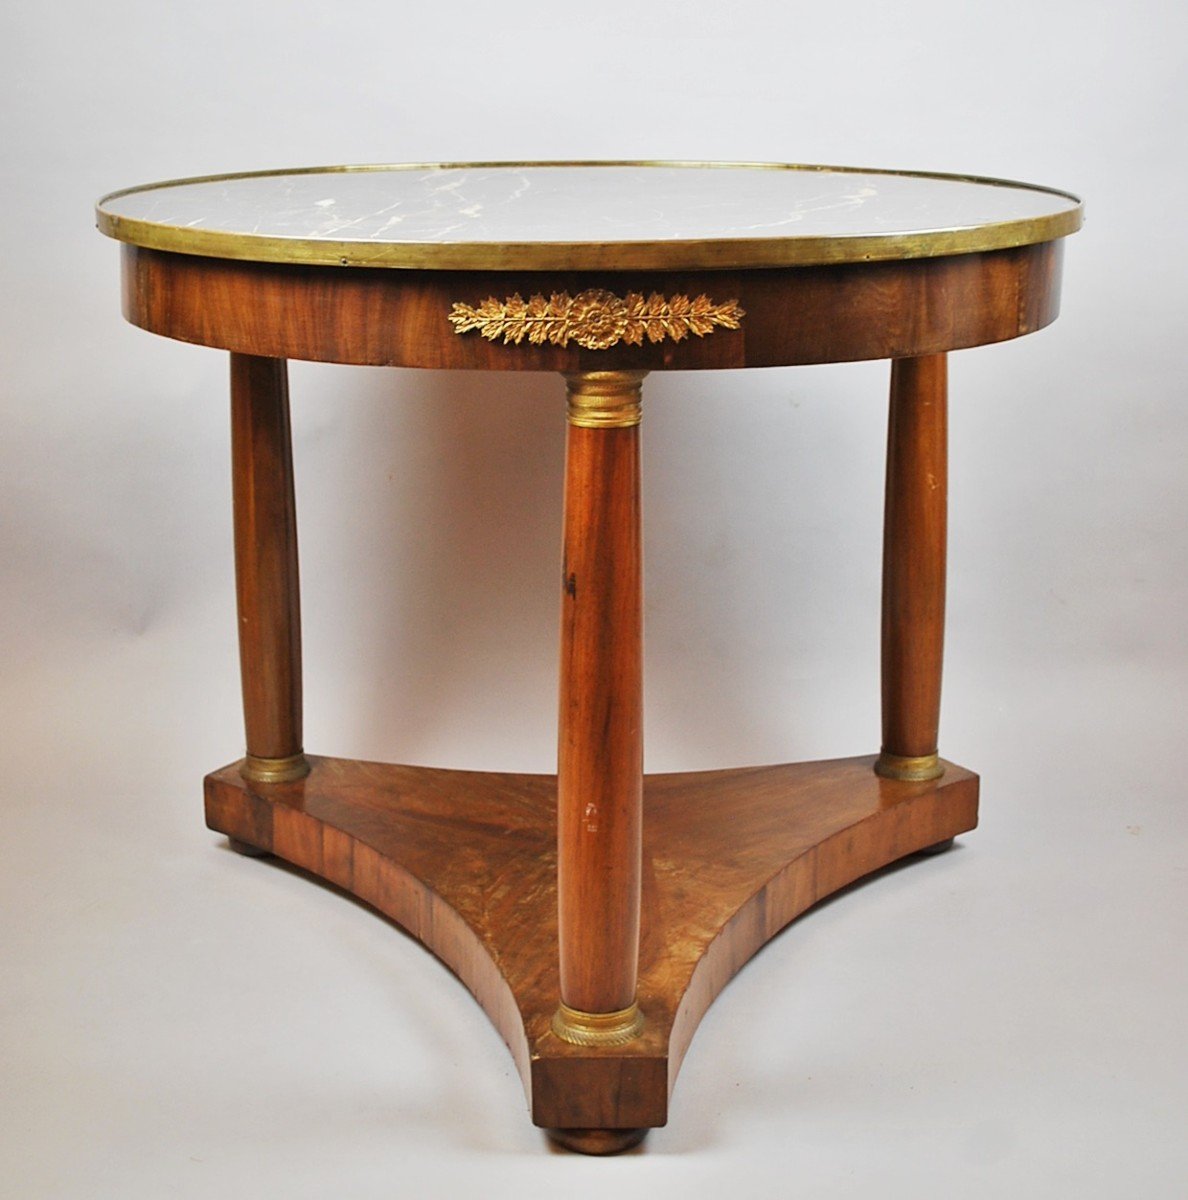 Empire Mahogany Pedestal Table With Marble Shelf 19th